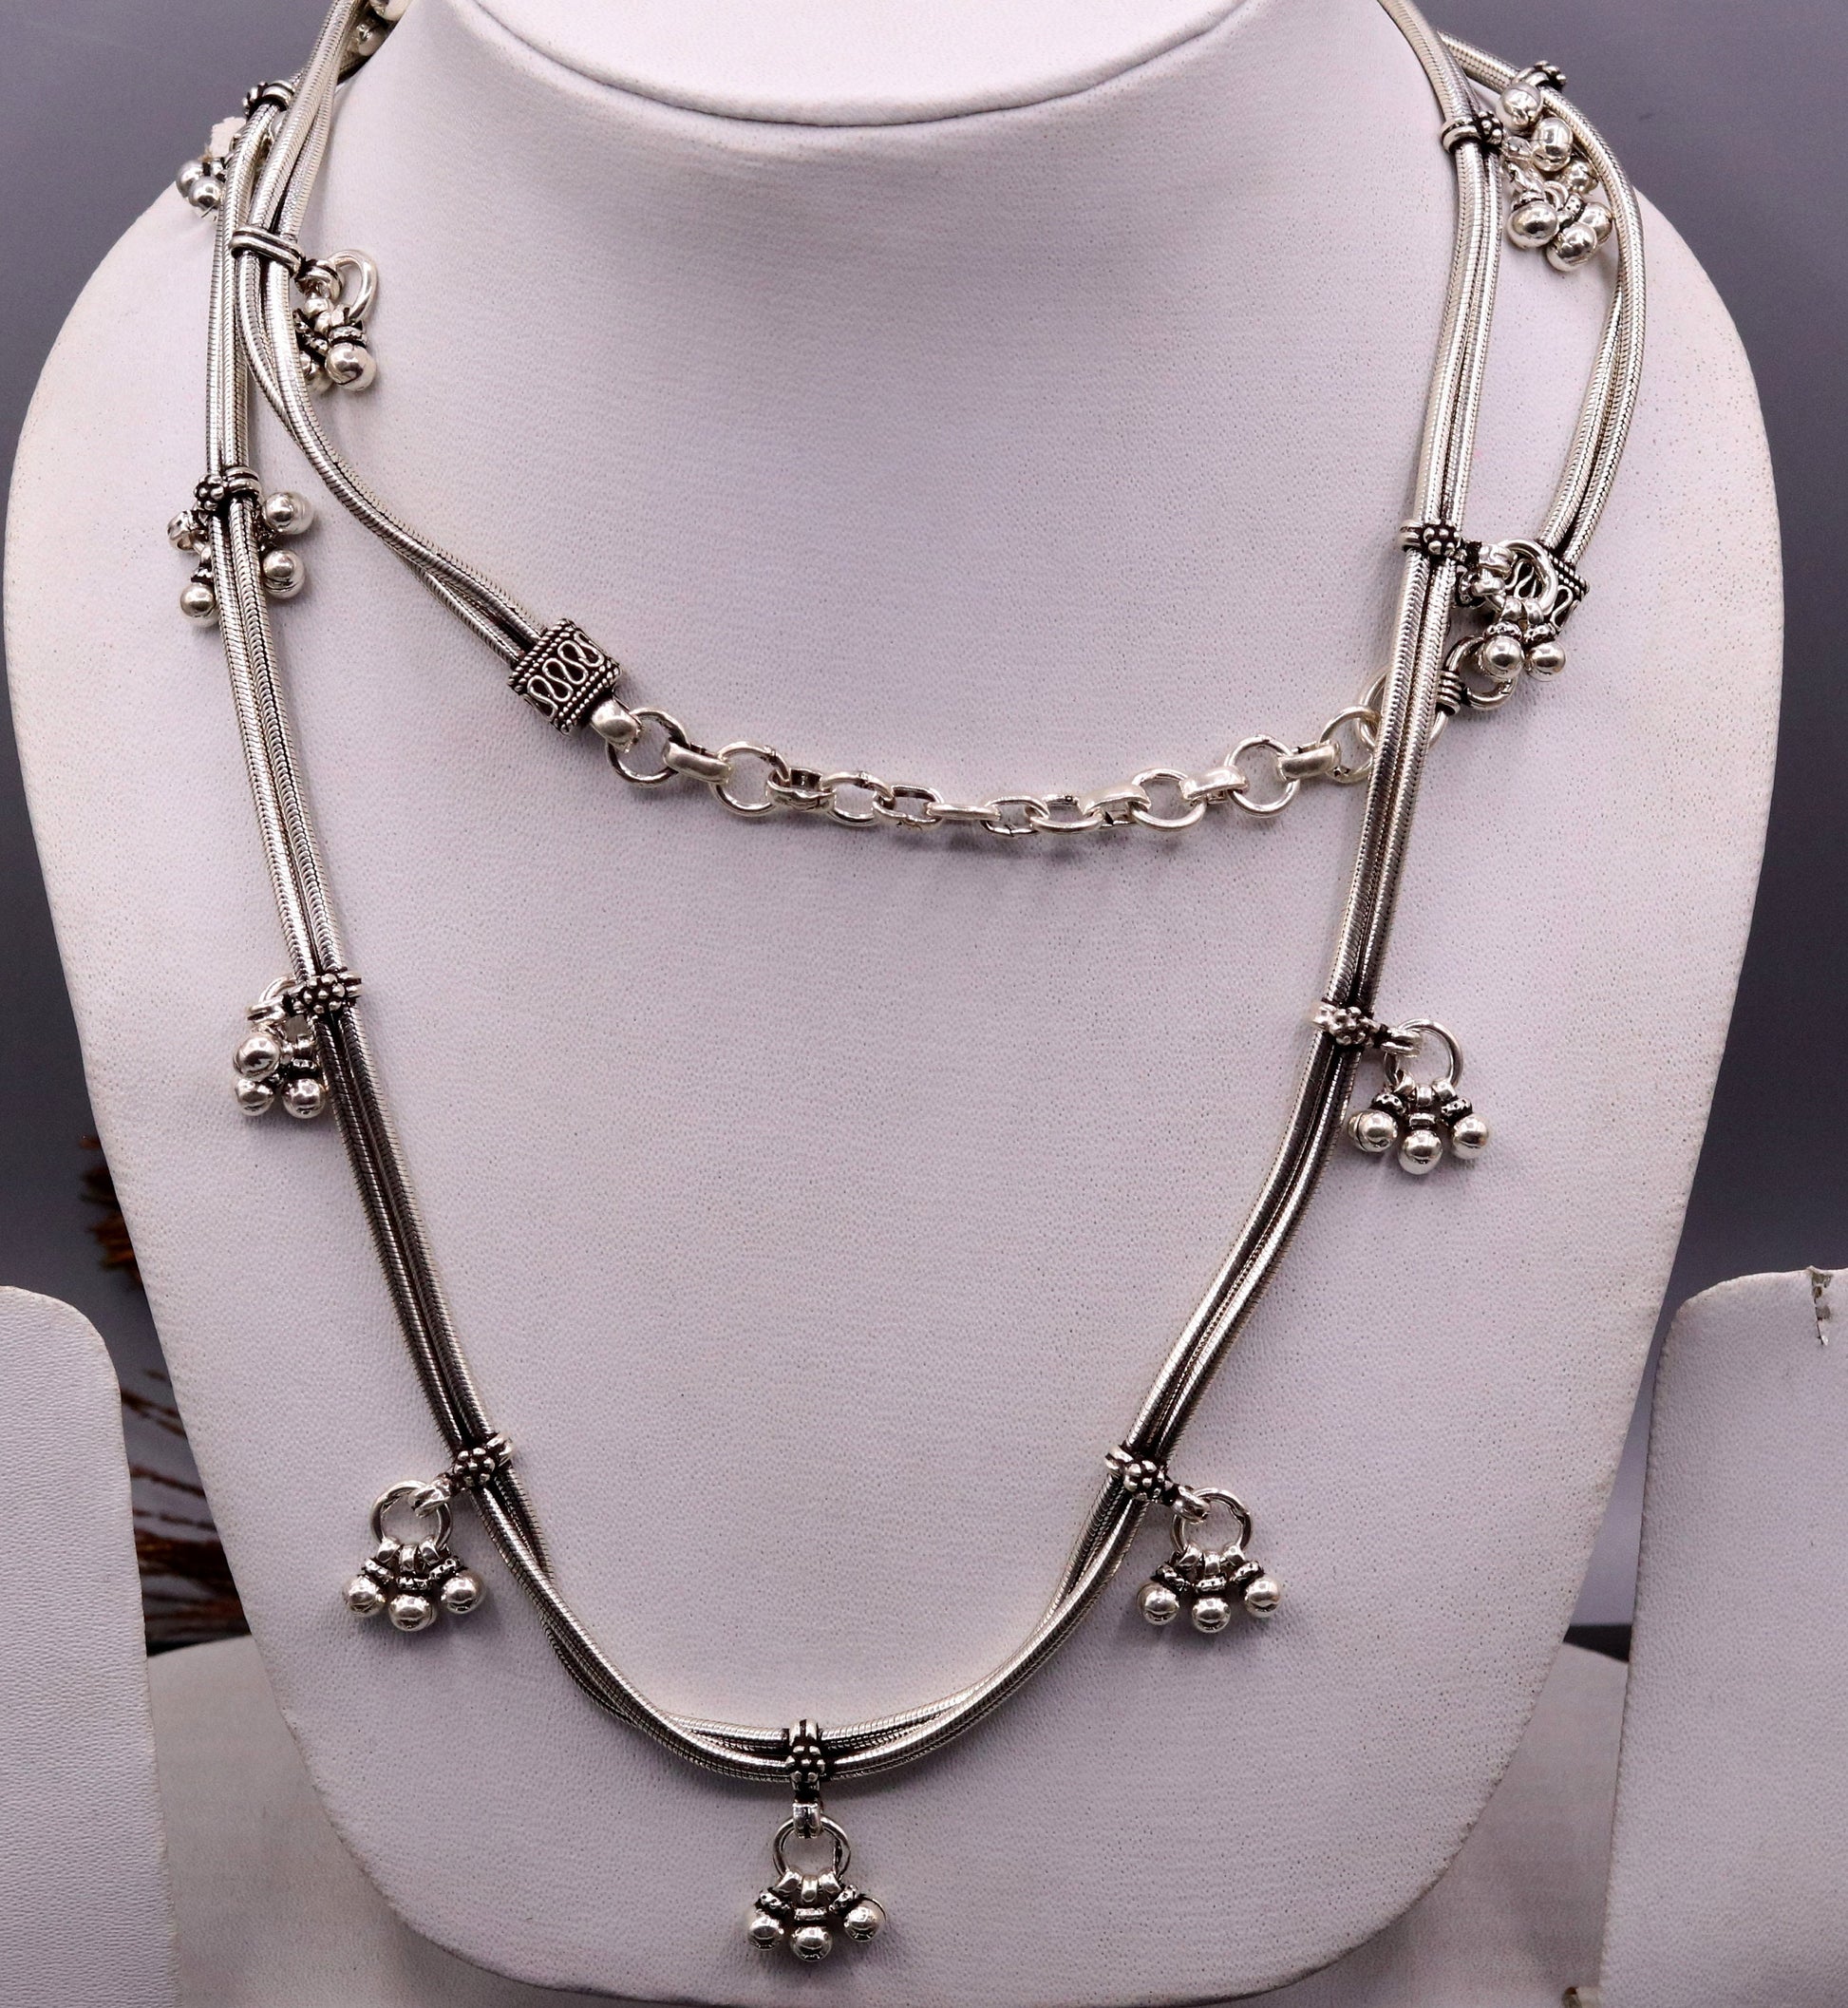 All size double line Adjustable 925 sterling silver handmade snake chain belly chain, waist chain, sari chain belt belly dance jewelry wch20 - TRIBAL ORNAMENTS